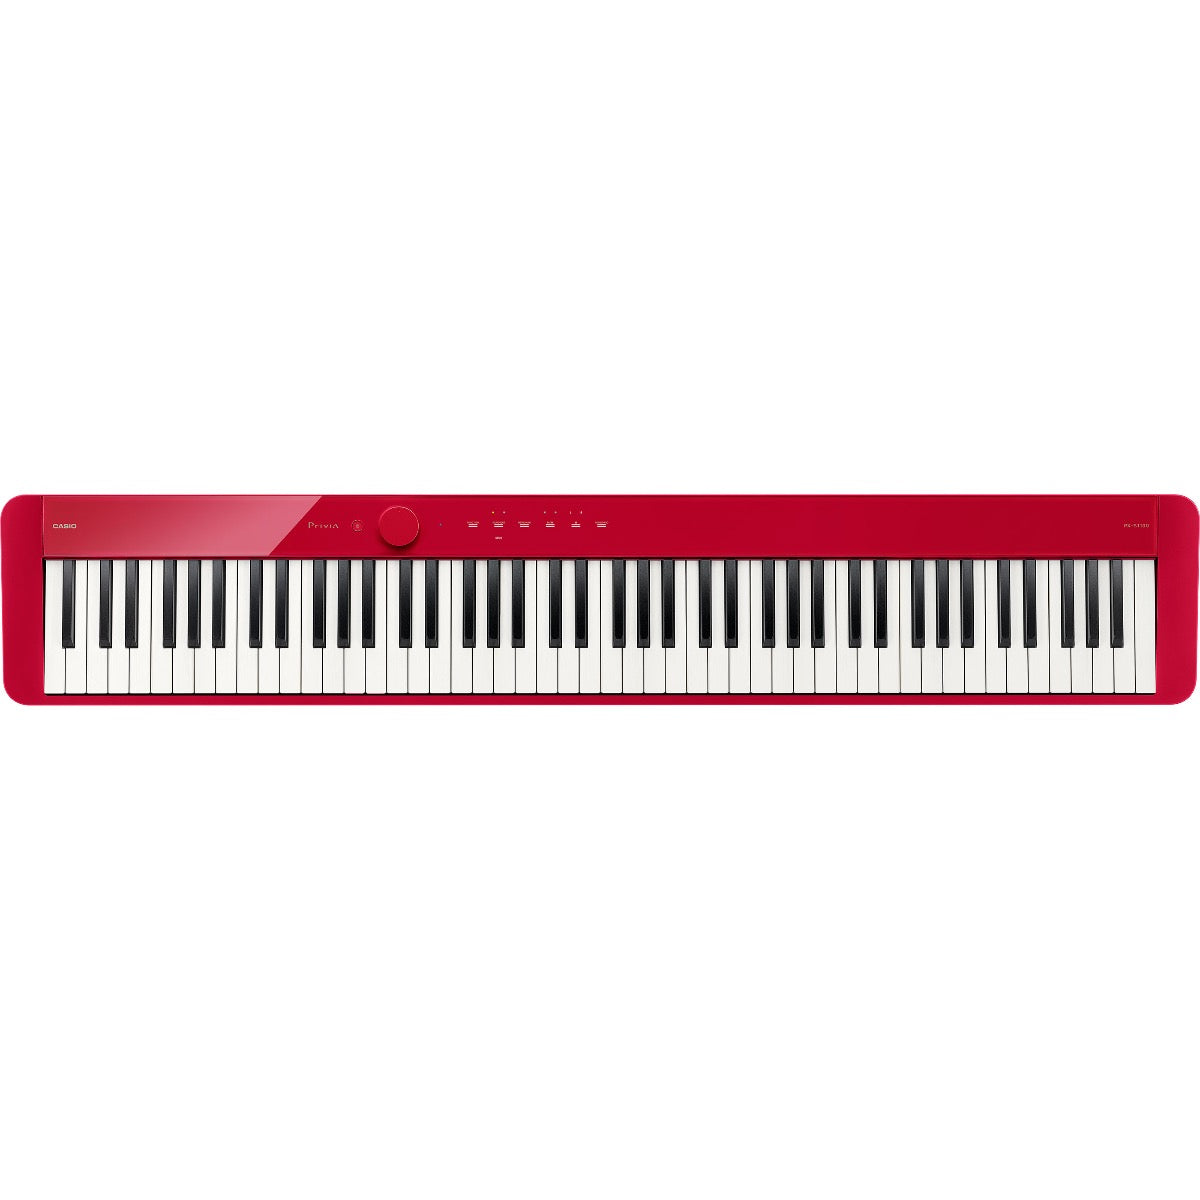 Top view of Casio Privia PX-S1100 Digital Piano - Red